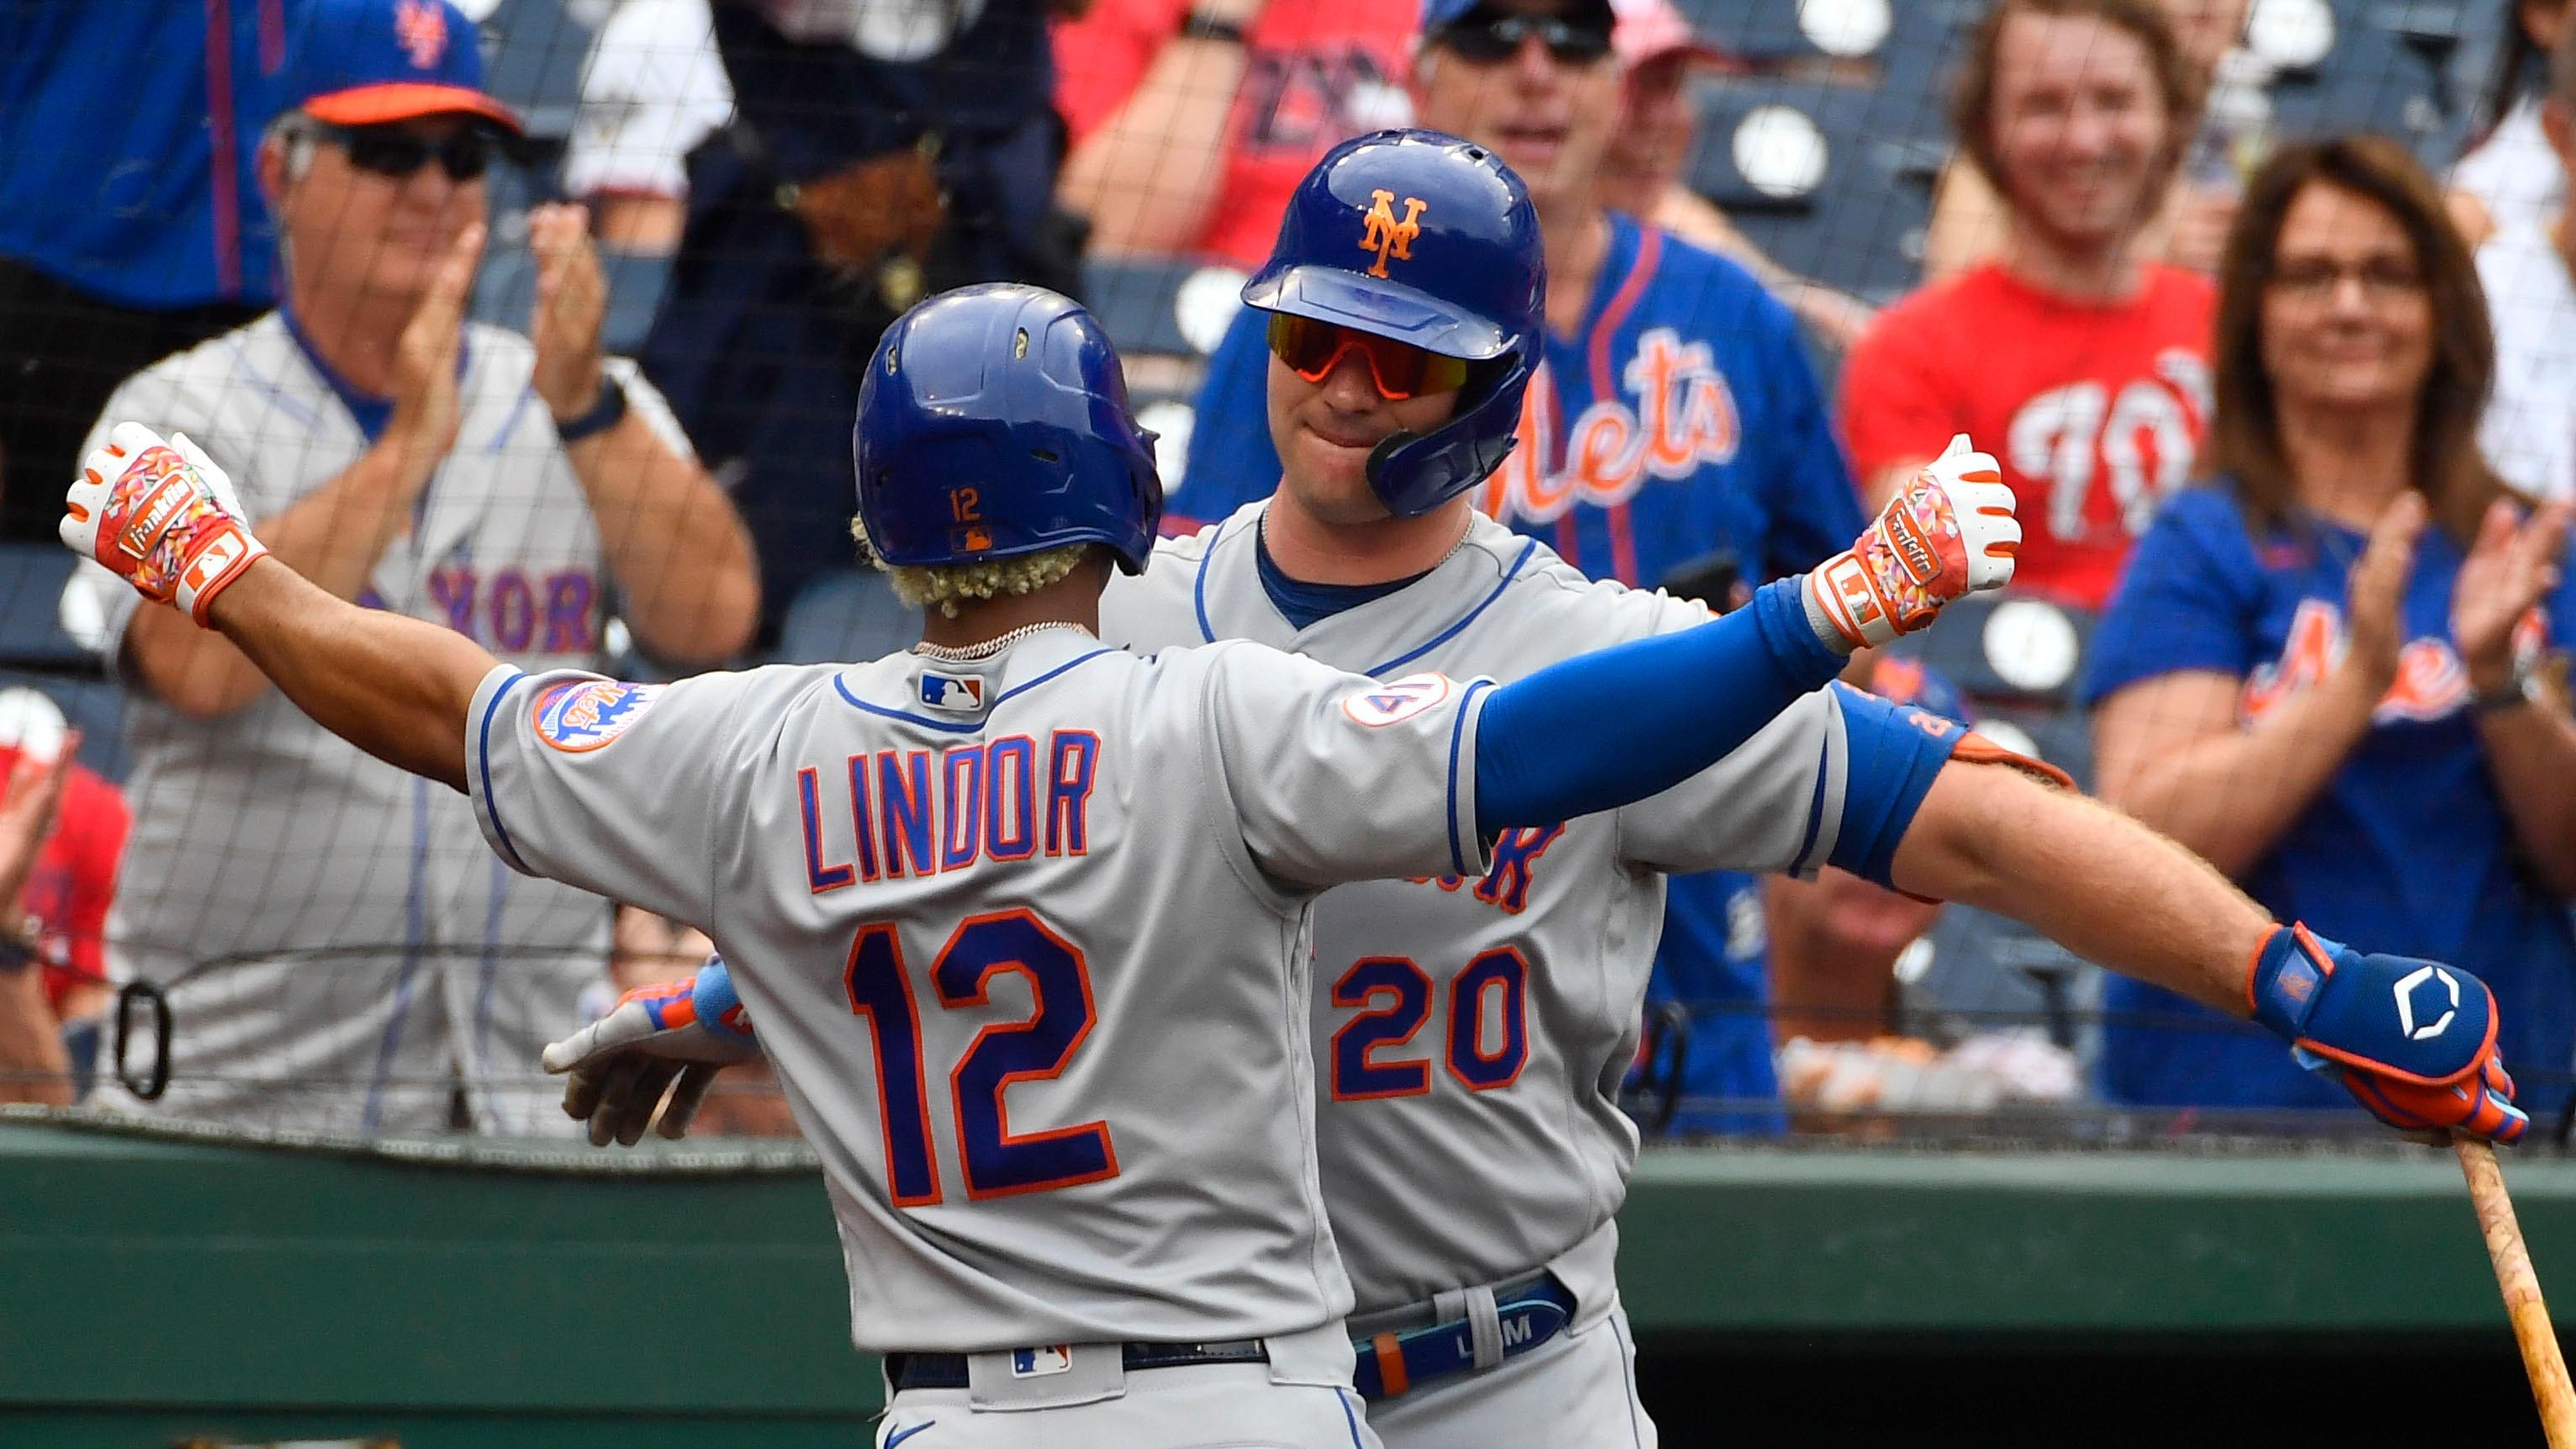 Jun 19, 2021; Washington, District of Columbia, USA; New York Mets shortstop Francisco Lindor (12) is congratulated by first baseman Pete Alonso (20) after hitting a two run home run against the Washington Nationals during the first inning at Nationals Park. / Brad Mills-USA TODAY Sports